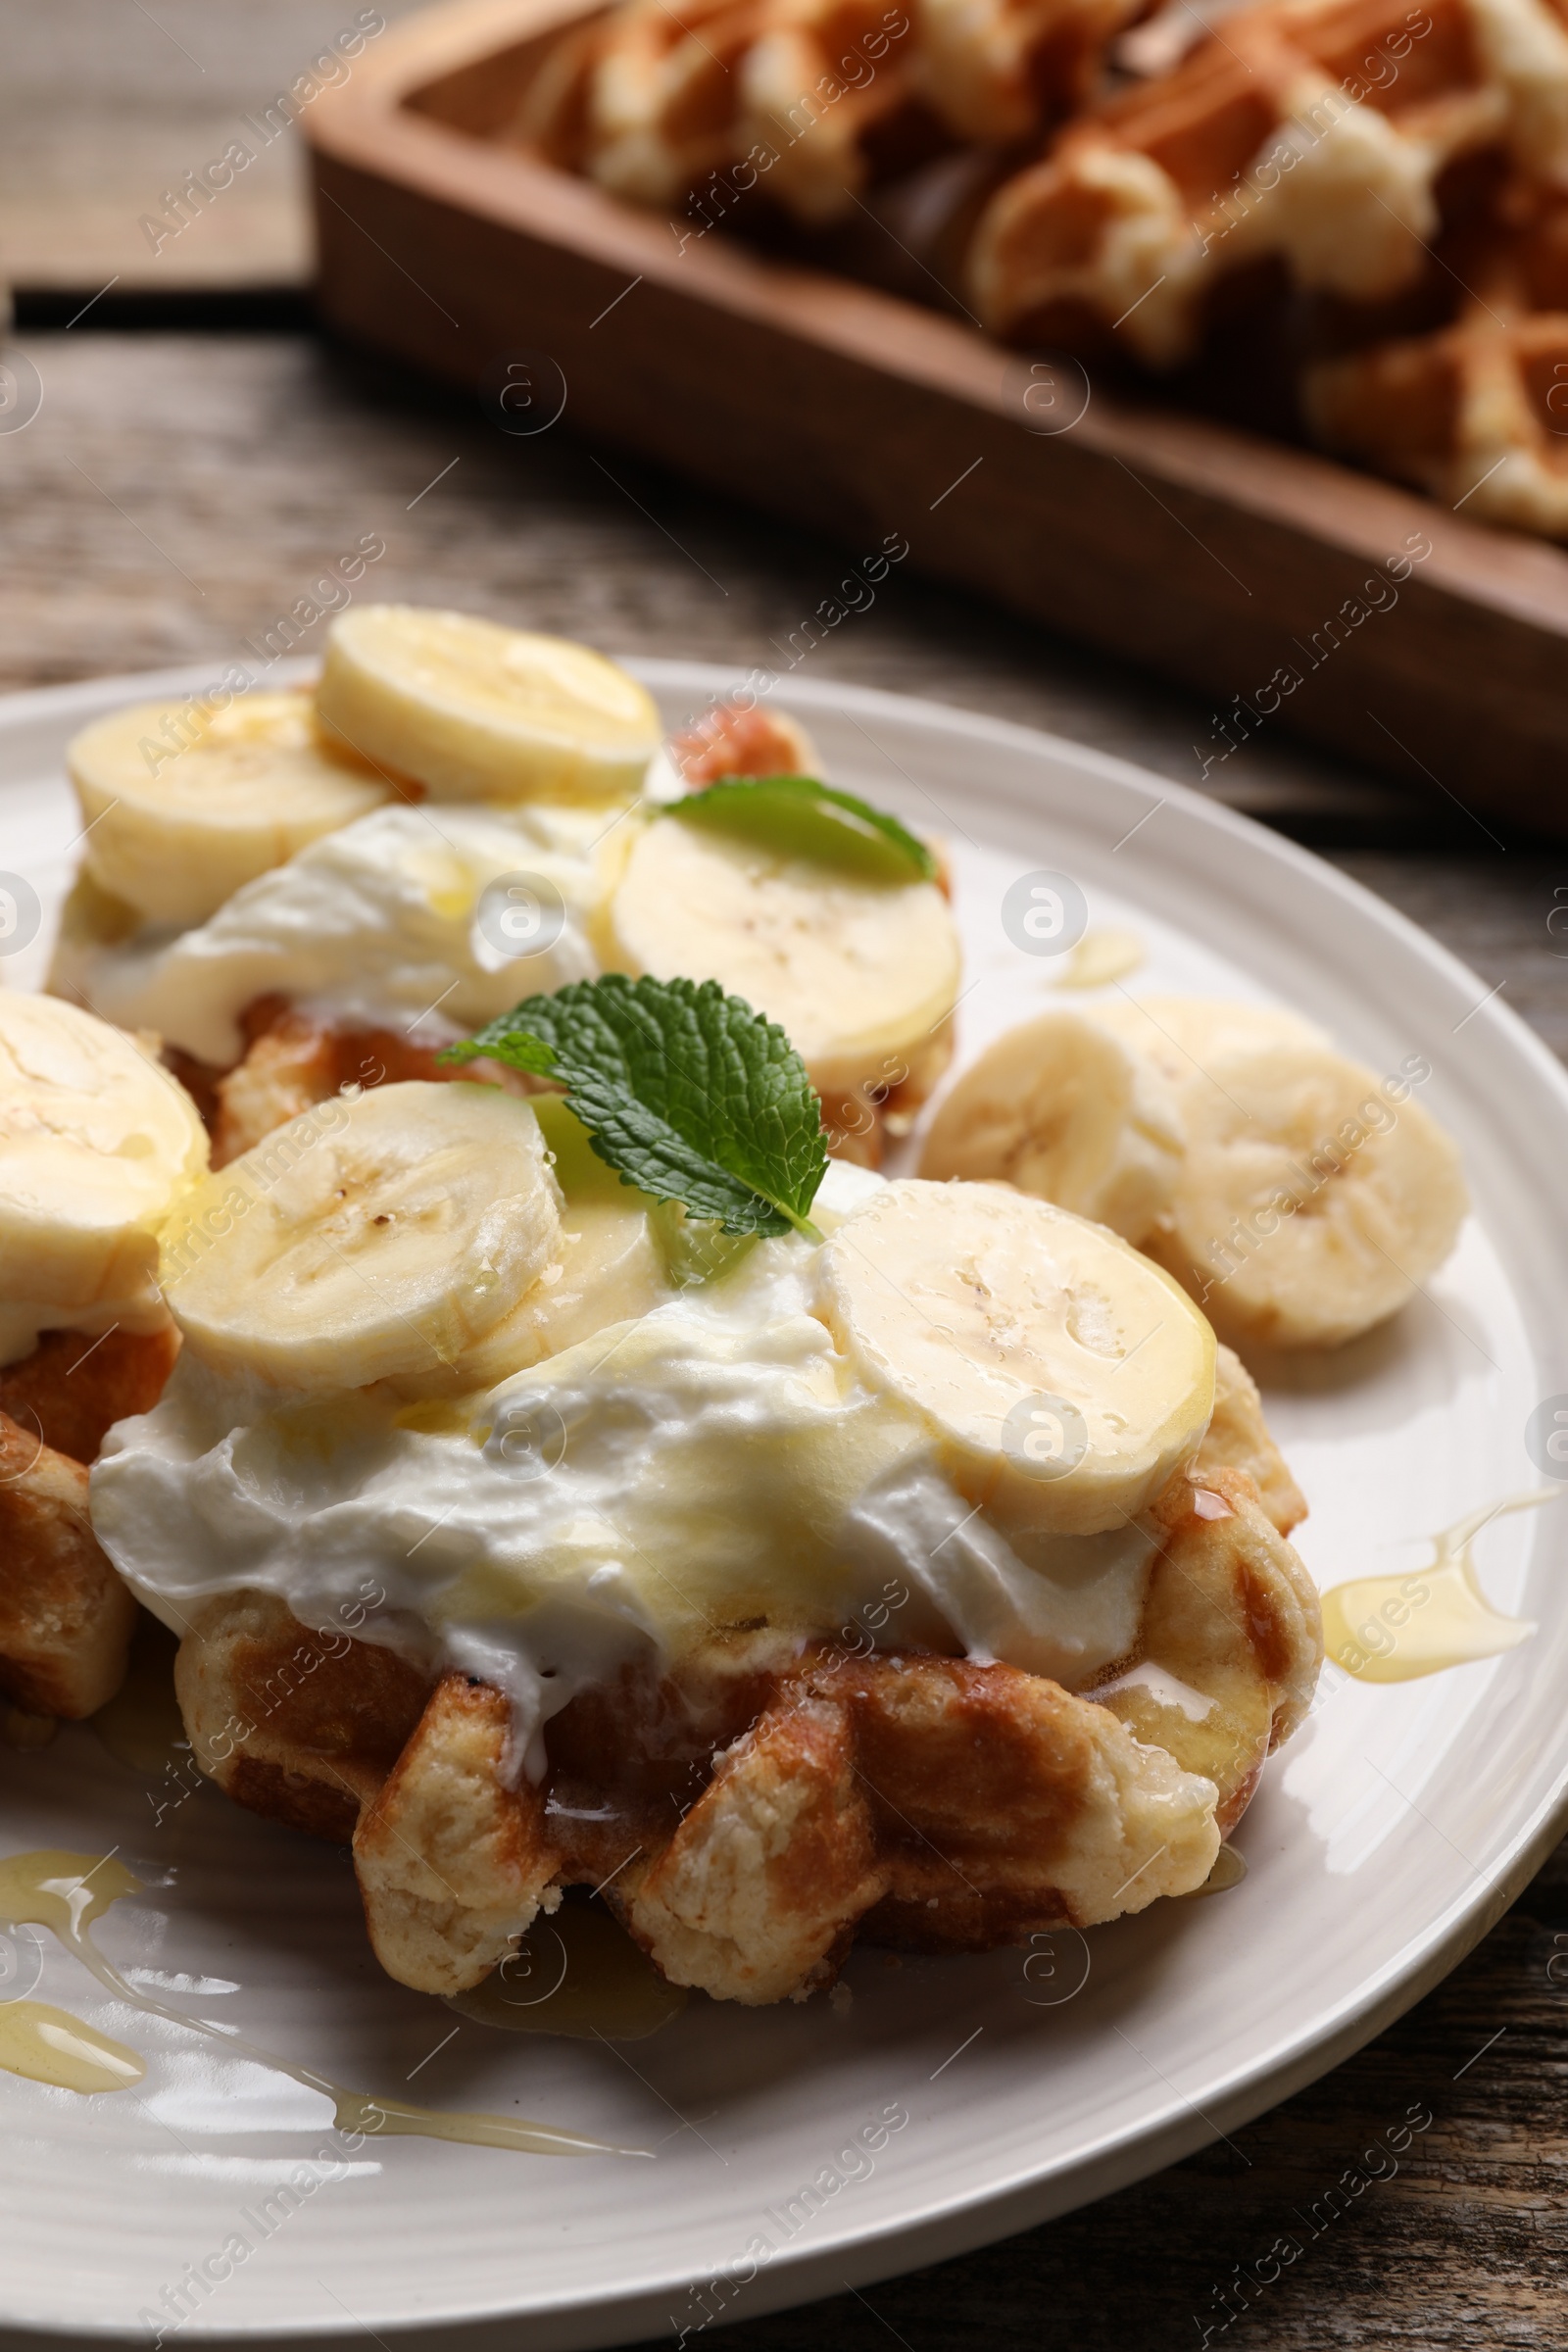 Photo of Delicious Belgian waffles with banana and whipped cream on table, closeup